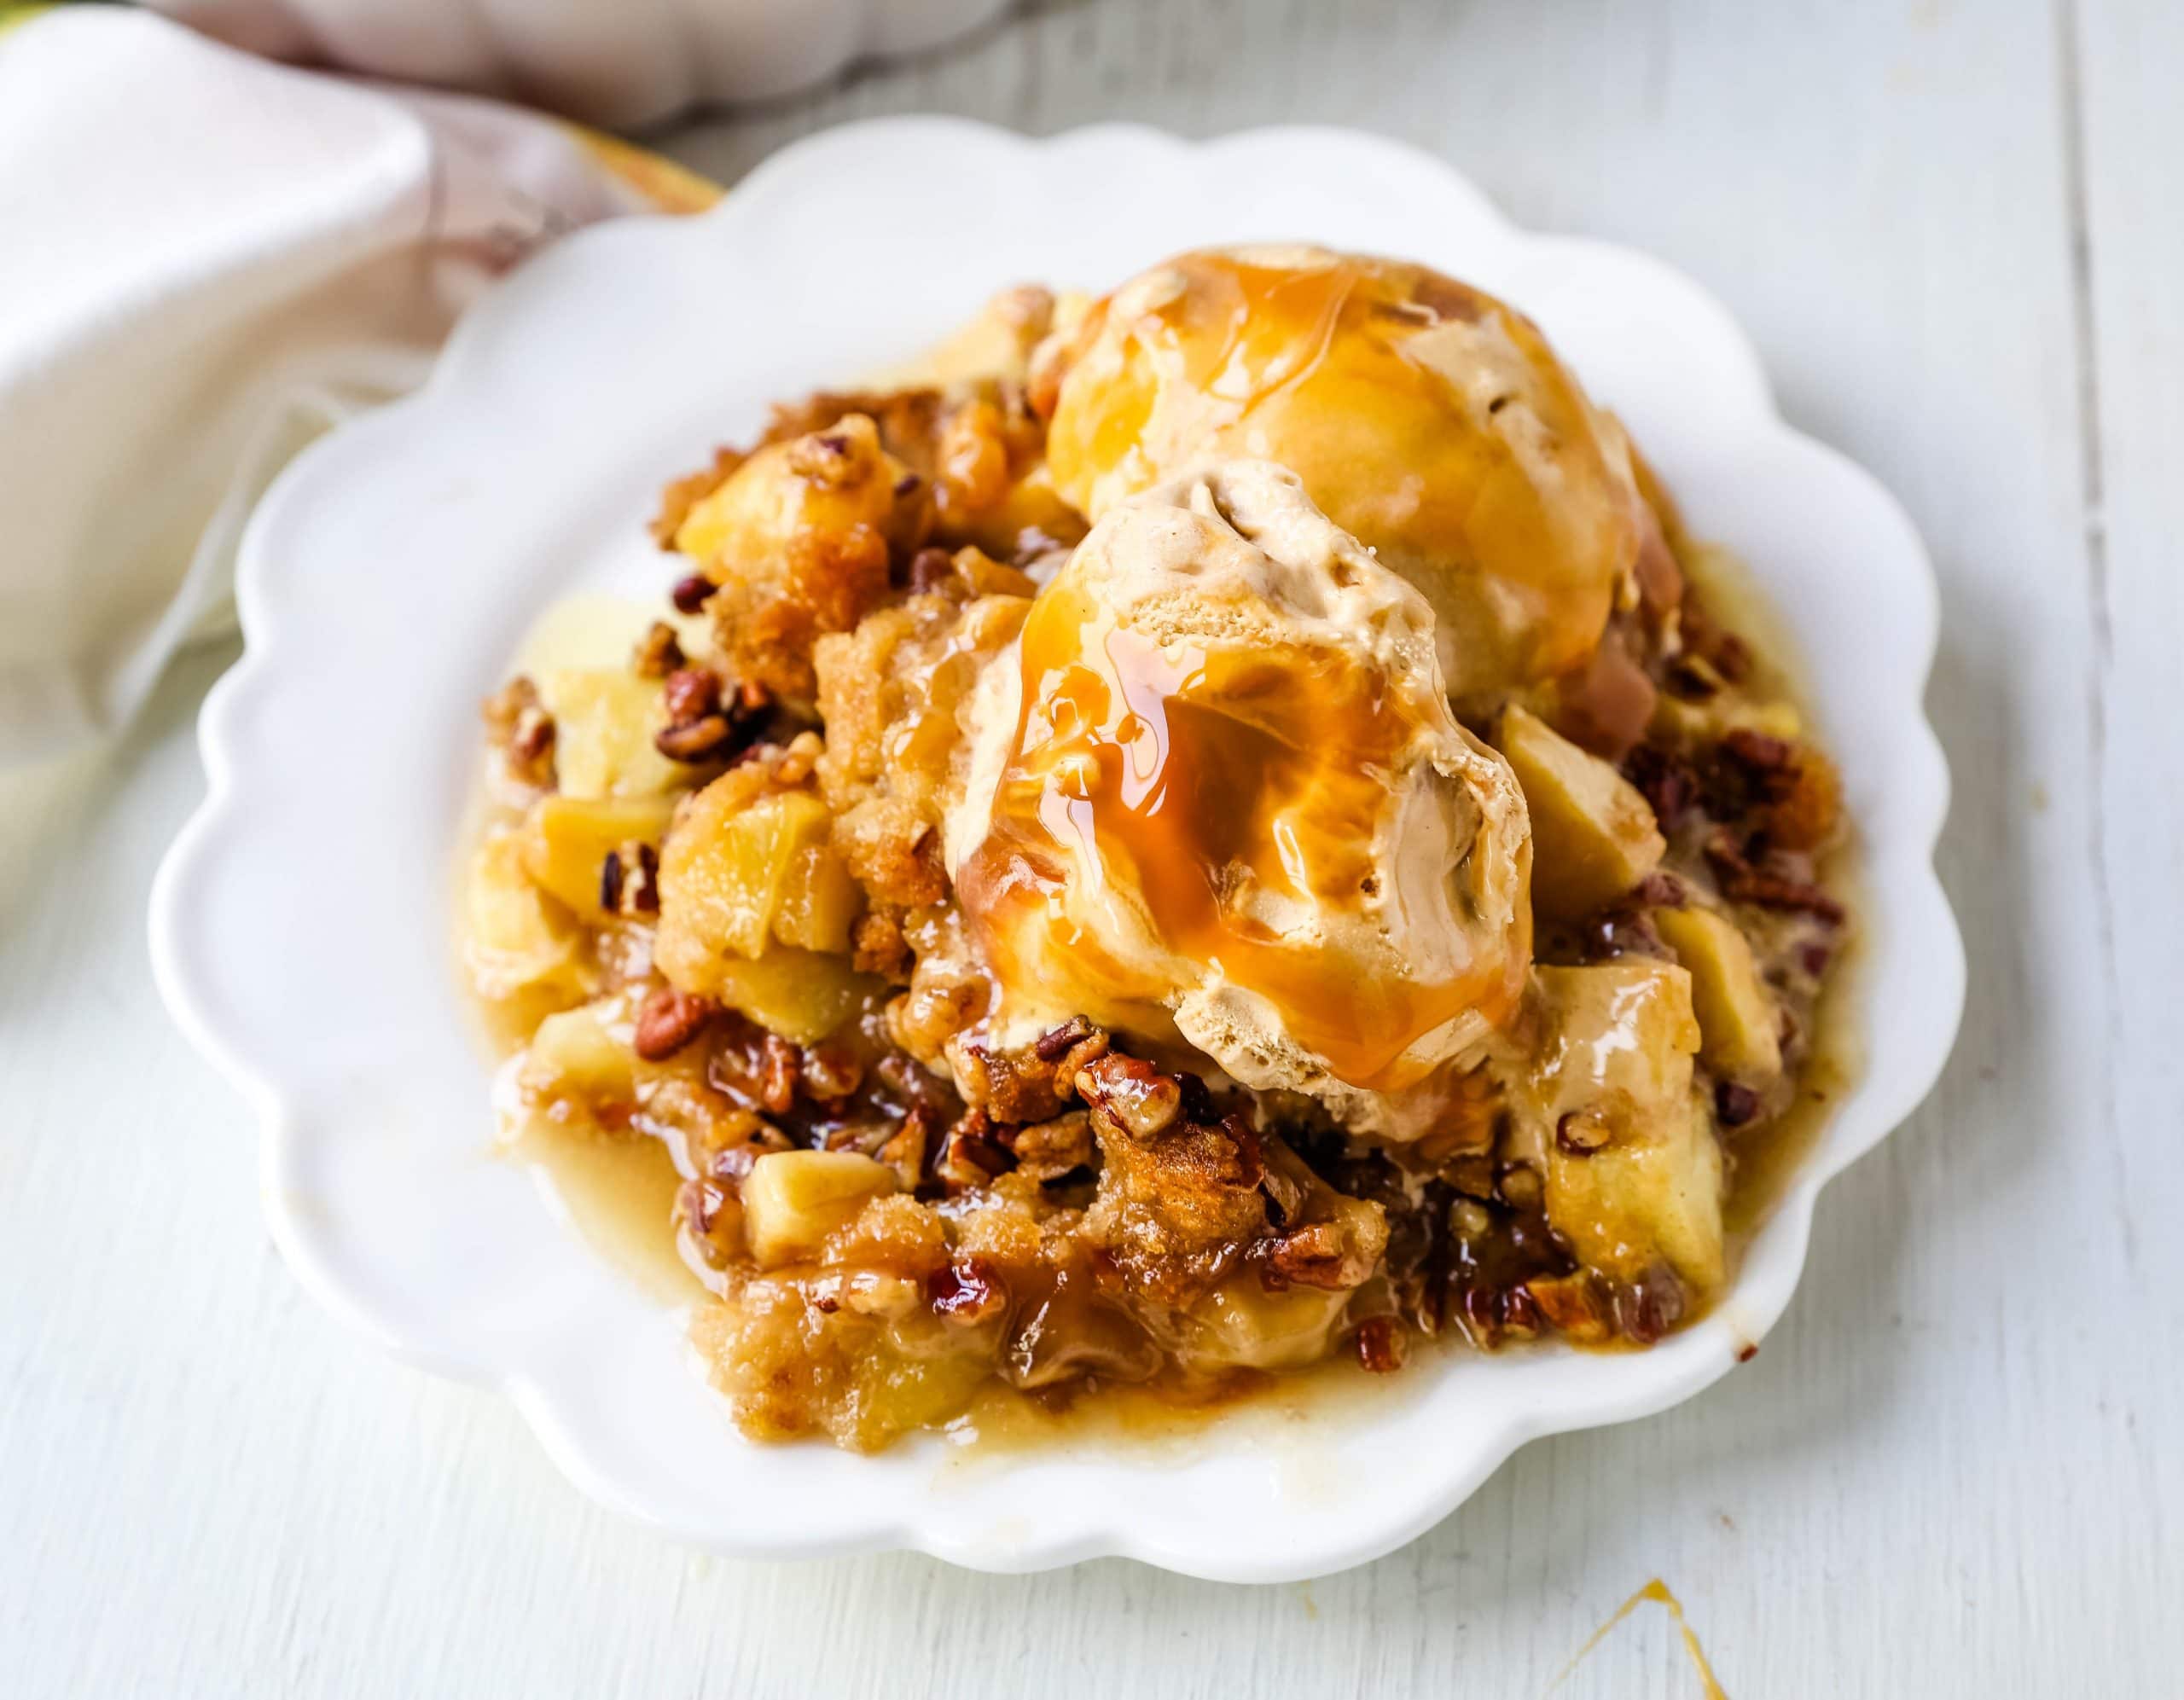 Apple Crisp. A classic Fall dessert made with sweet and tart apples and a homemade buttery brown sugar topping. This Apple Crisp recipe is made with freshly chopped sweetened apples with a handcrafted brown sugar crumble. It is a warm comforting dessert topped with vanilla bean ice cream and salted caramel. www.modernhoney.com #applecrisp #appledesserts #appledessert #dessert